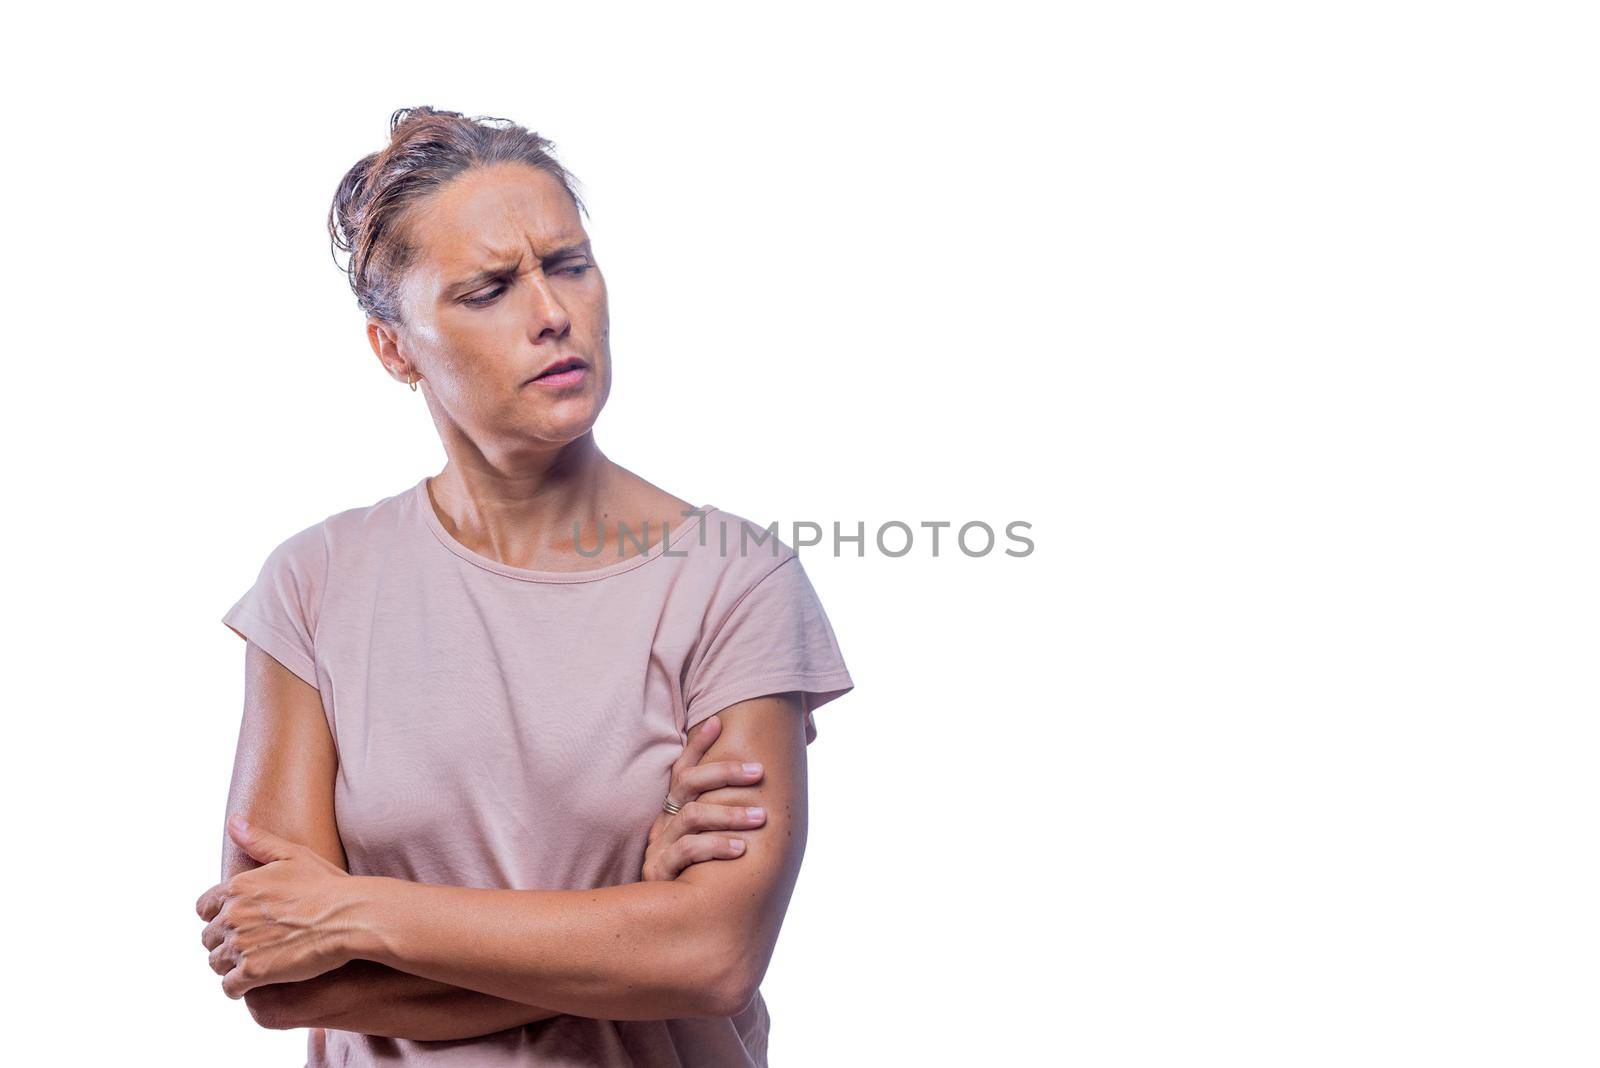 Front view of a distrustful woman with crossed arms on a white background looking to a side with copy space.